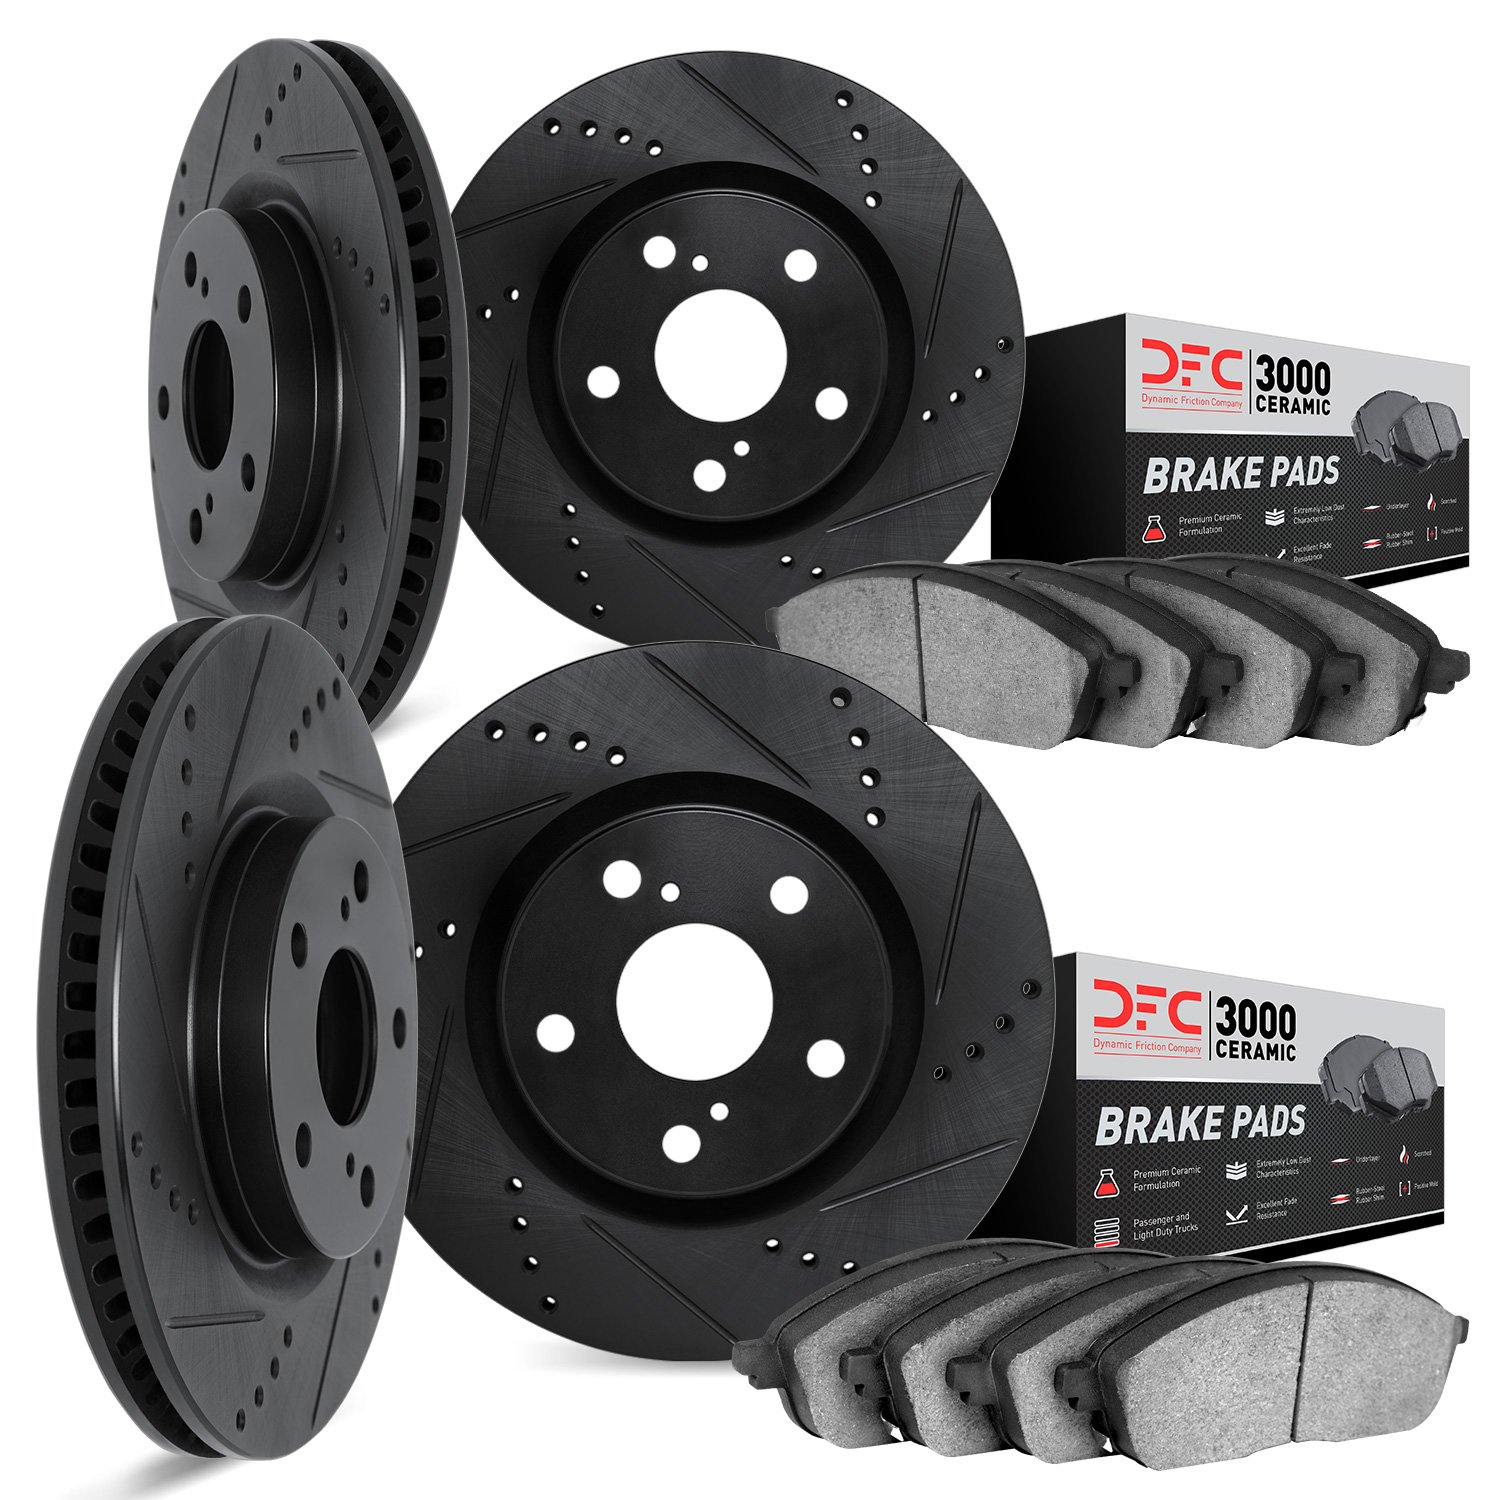 8304-31080 Drilled/Slotted Brake Rotors with 3000-Series Ceramic Brake Pads Kit [Black], 2011-2016 BMW, Position: Front and Rear